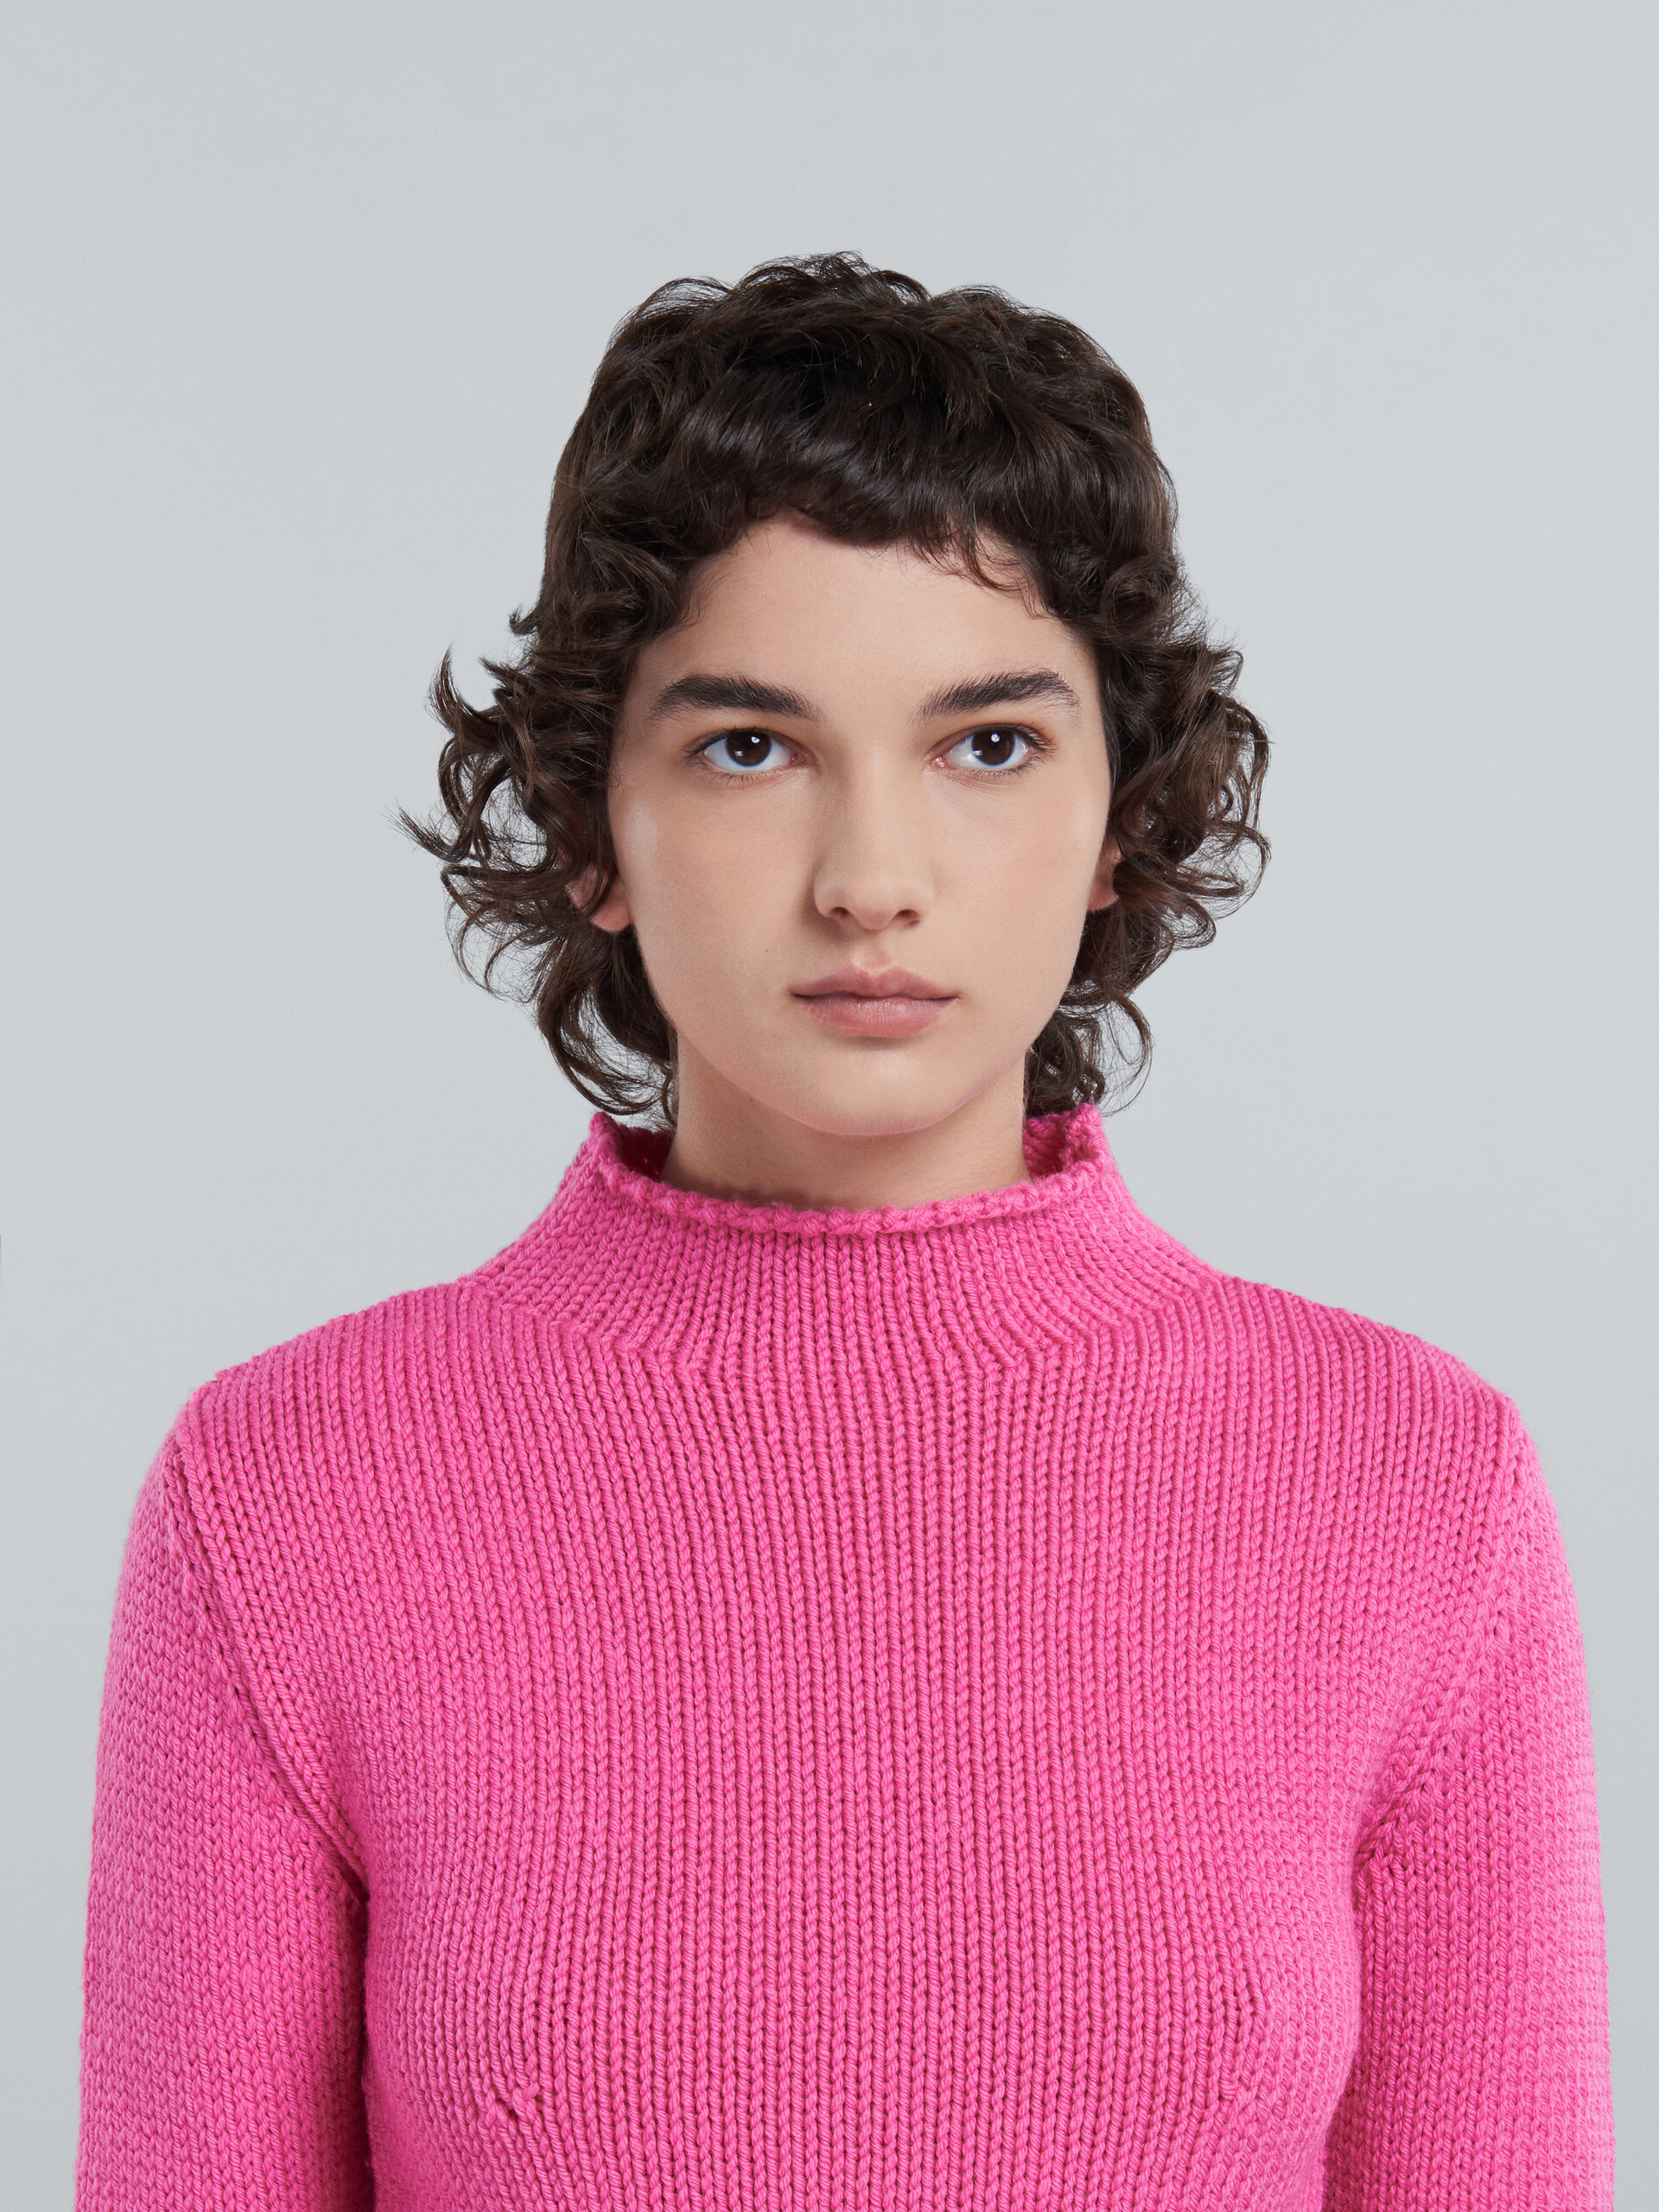 Fuchsia wool sweater with logo - Pullovers - Image 4